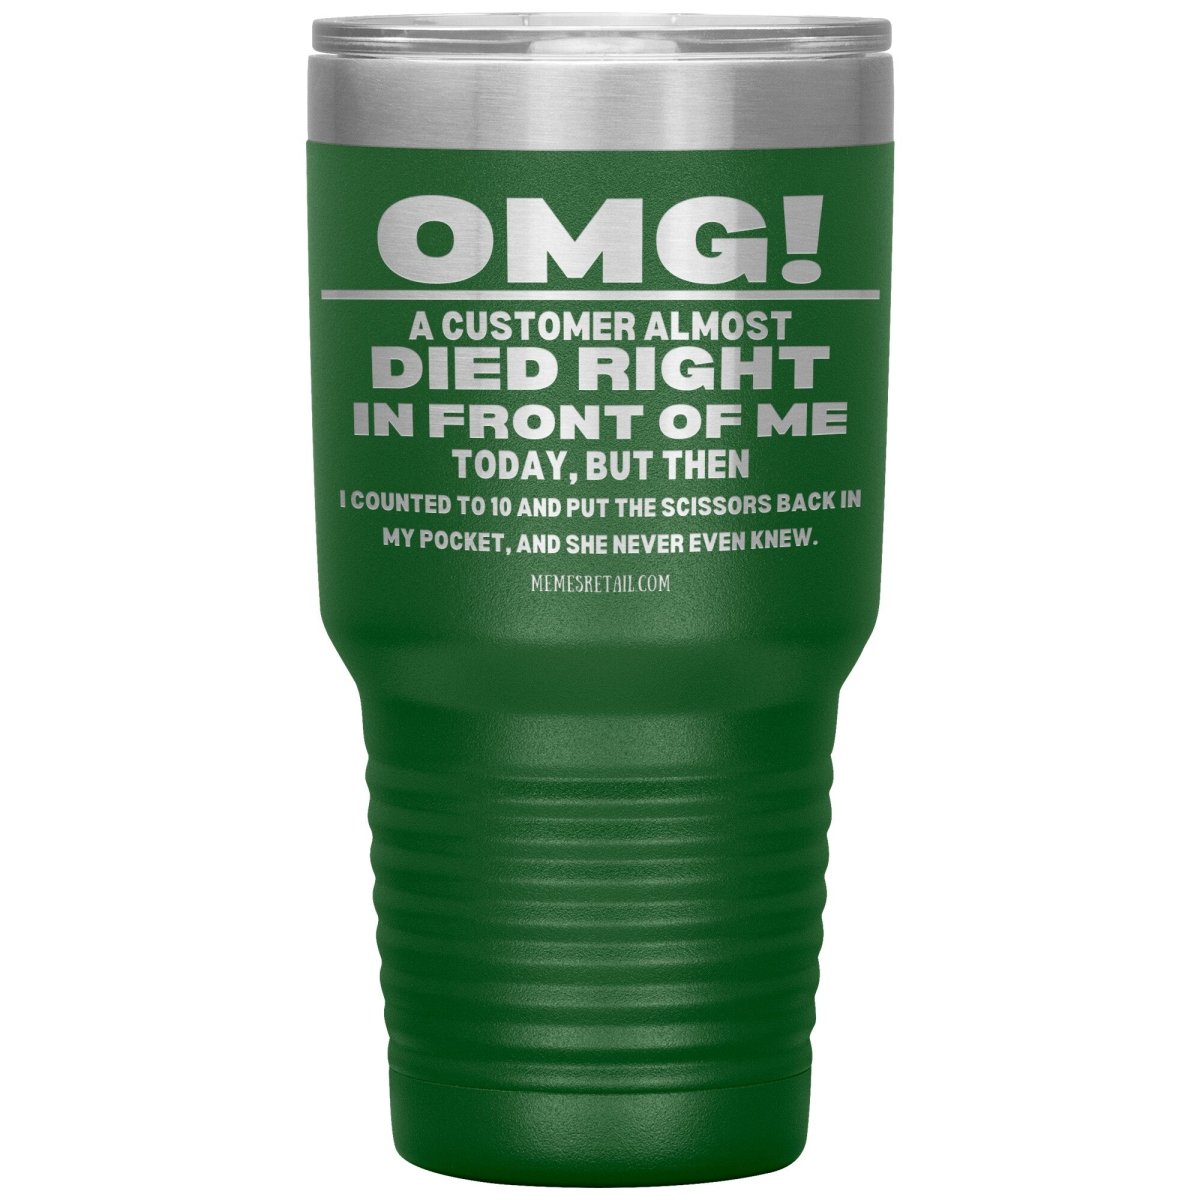 OMG! A Customer Almost Died Right In Front Of Me Tumbler, 30oz Insulated Tumbler / Green - MemesRetail.com